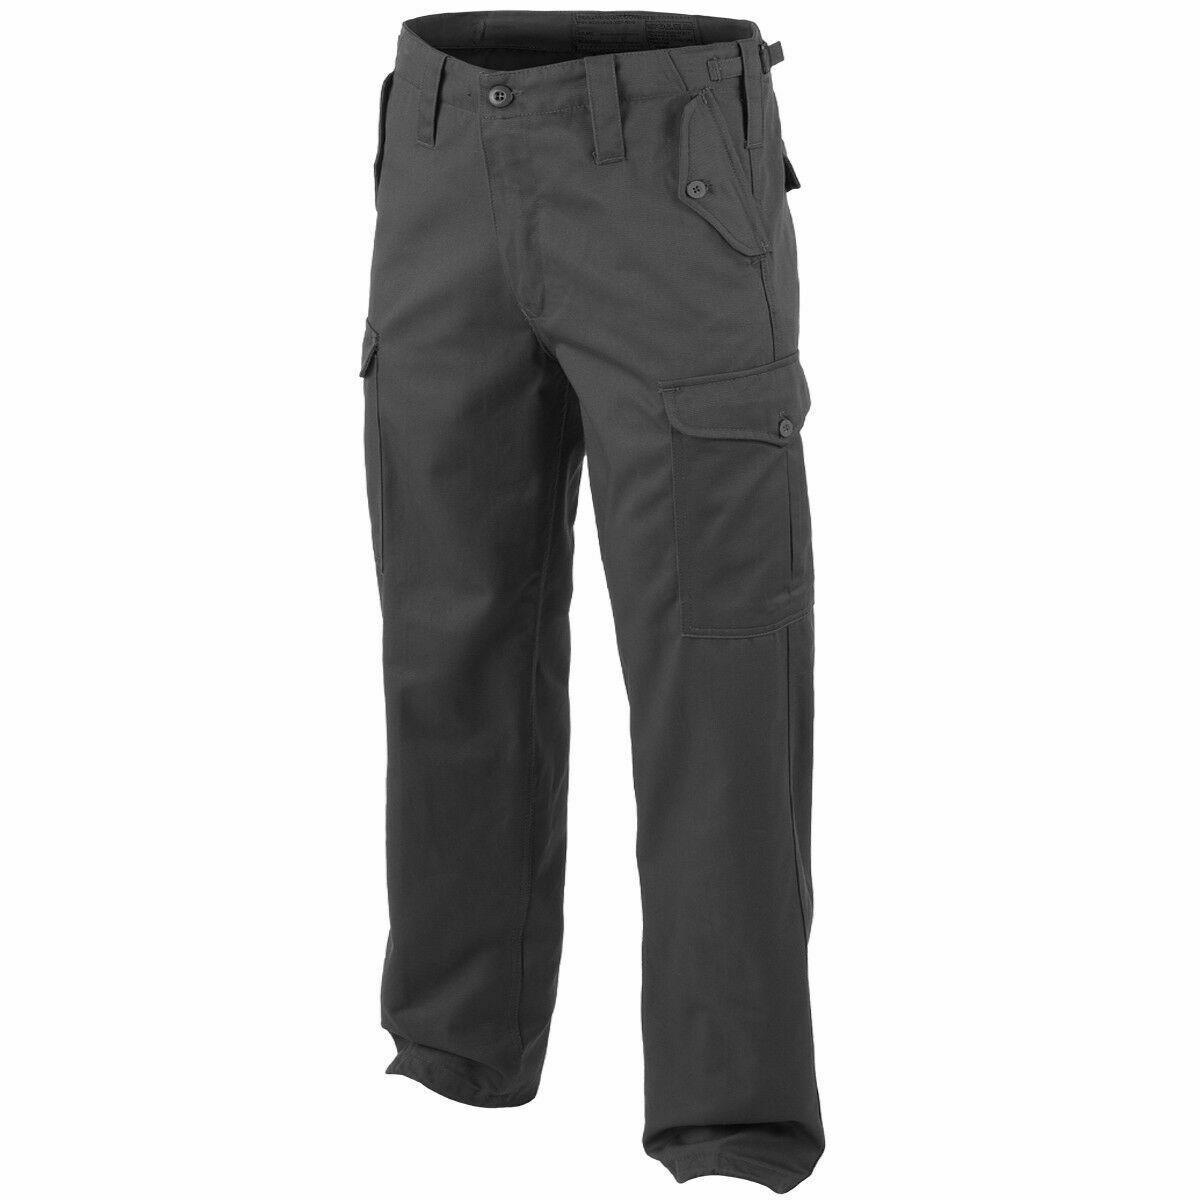 Endurance Ripstop Cargo Combat Tradesman Action Trouser with Security Zip  Pocket and Knee Pad Pockets - 28R (Grey/Black, 28W/31L) : Amazon.co.uk:  Fashion